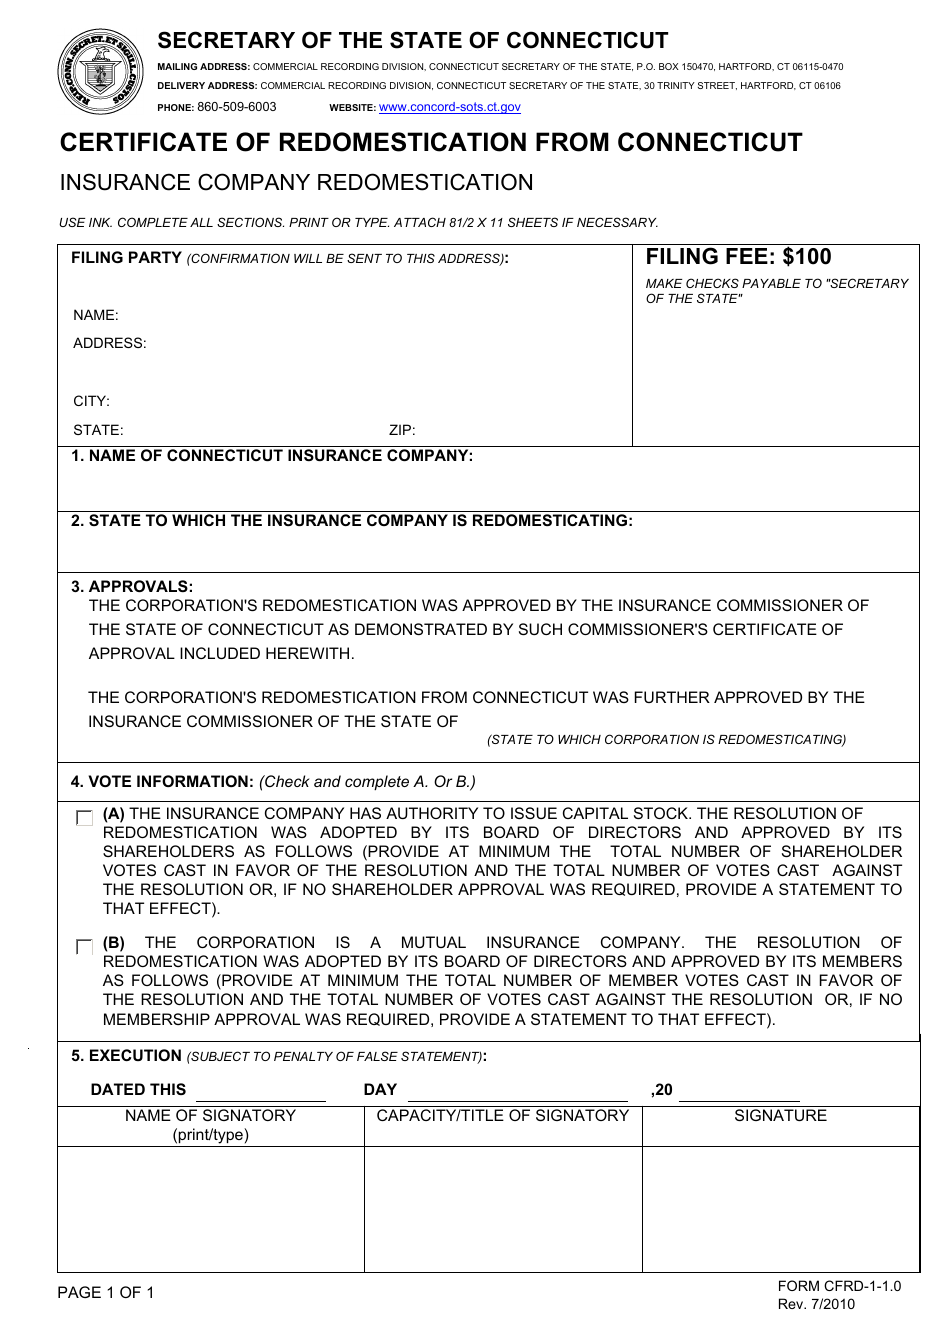 Form CFRD-1-1.0 Certificate of Redomestication From Connecticut - Insurance Company Redomestication - Connecticut, Page 1